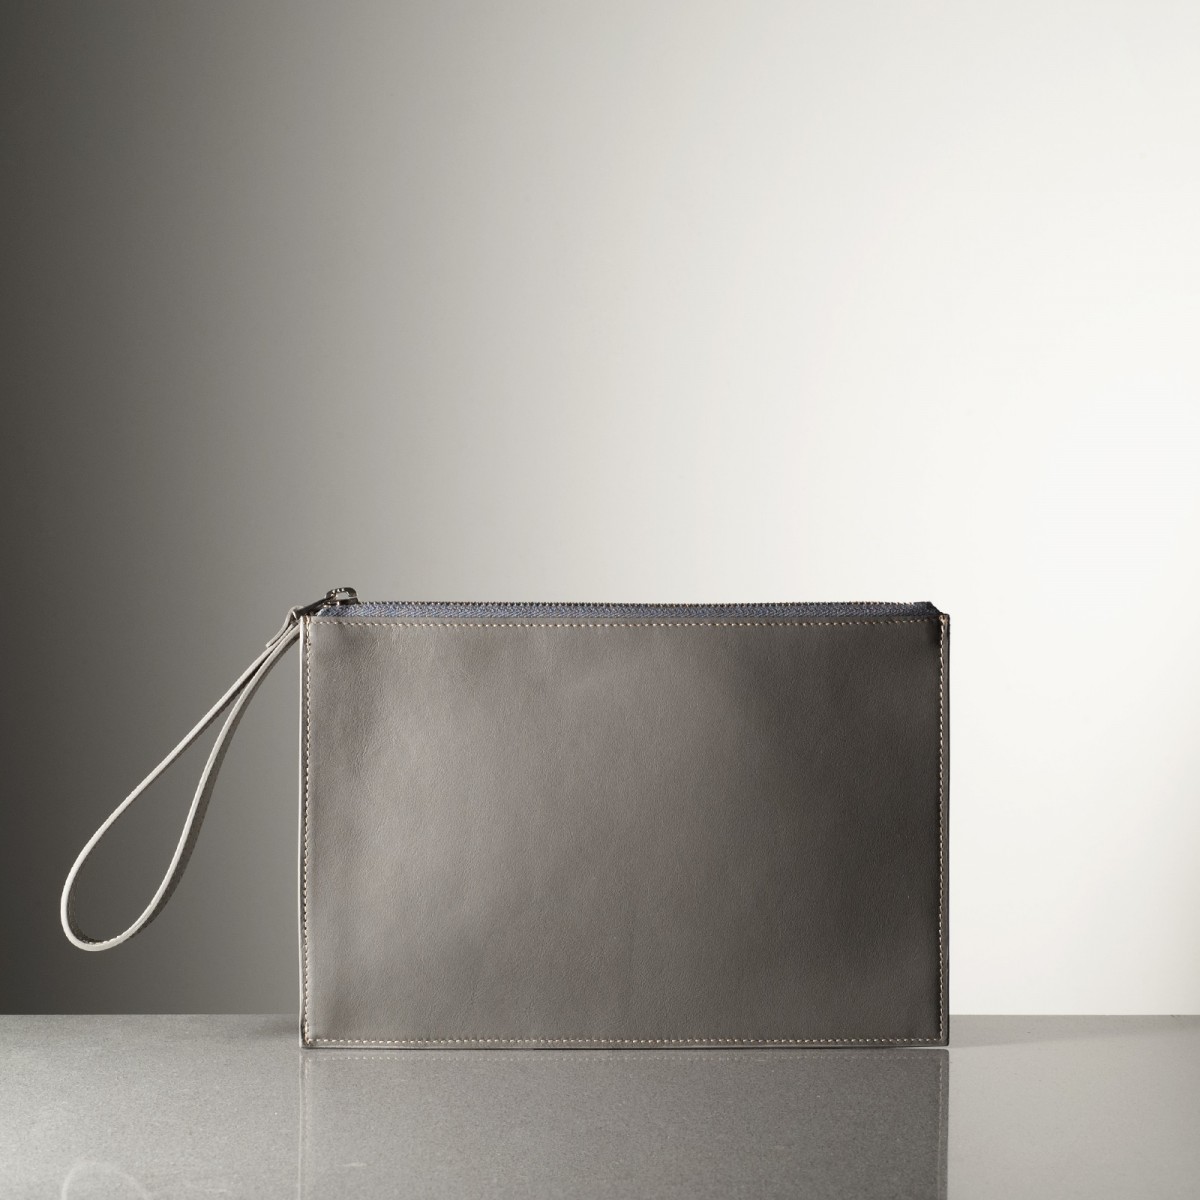 EMANUELE PM - Leather pochette pm, handmade in Italy